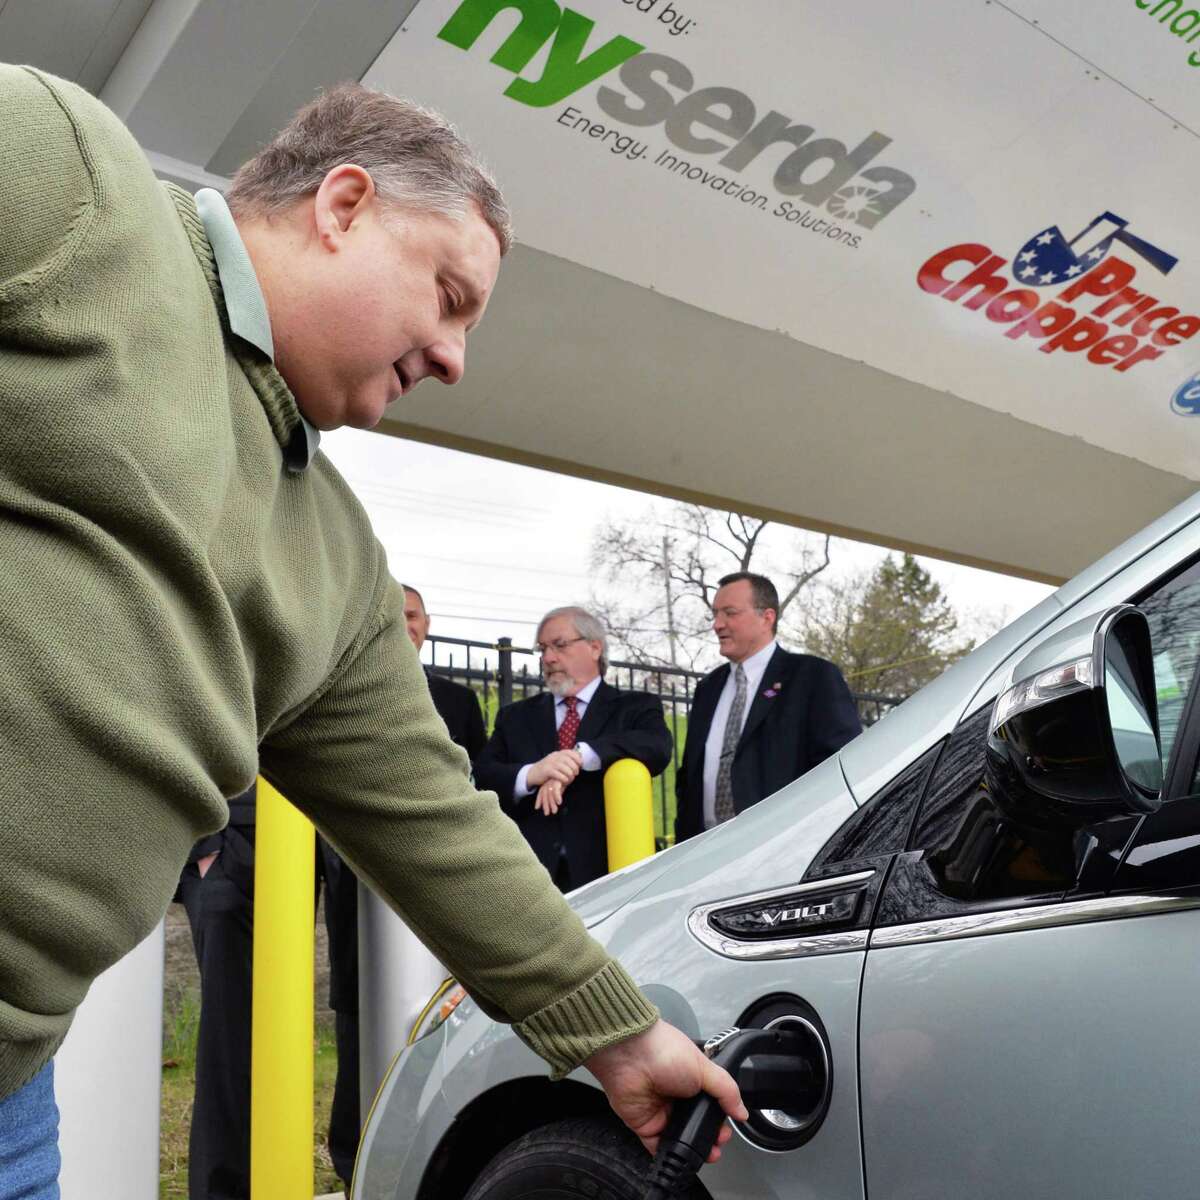 Rick Lipinskas of Guilderland plugs his Chevy Volt into at the new electric vehicle charging stations at the Price Chopper store on Balltown Road in Mohawk Commons in Niskayuna, NY Thursday April 25, 2013. (John Carl D'Annibale / Times Union)